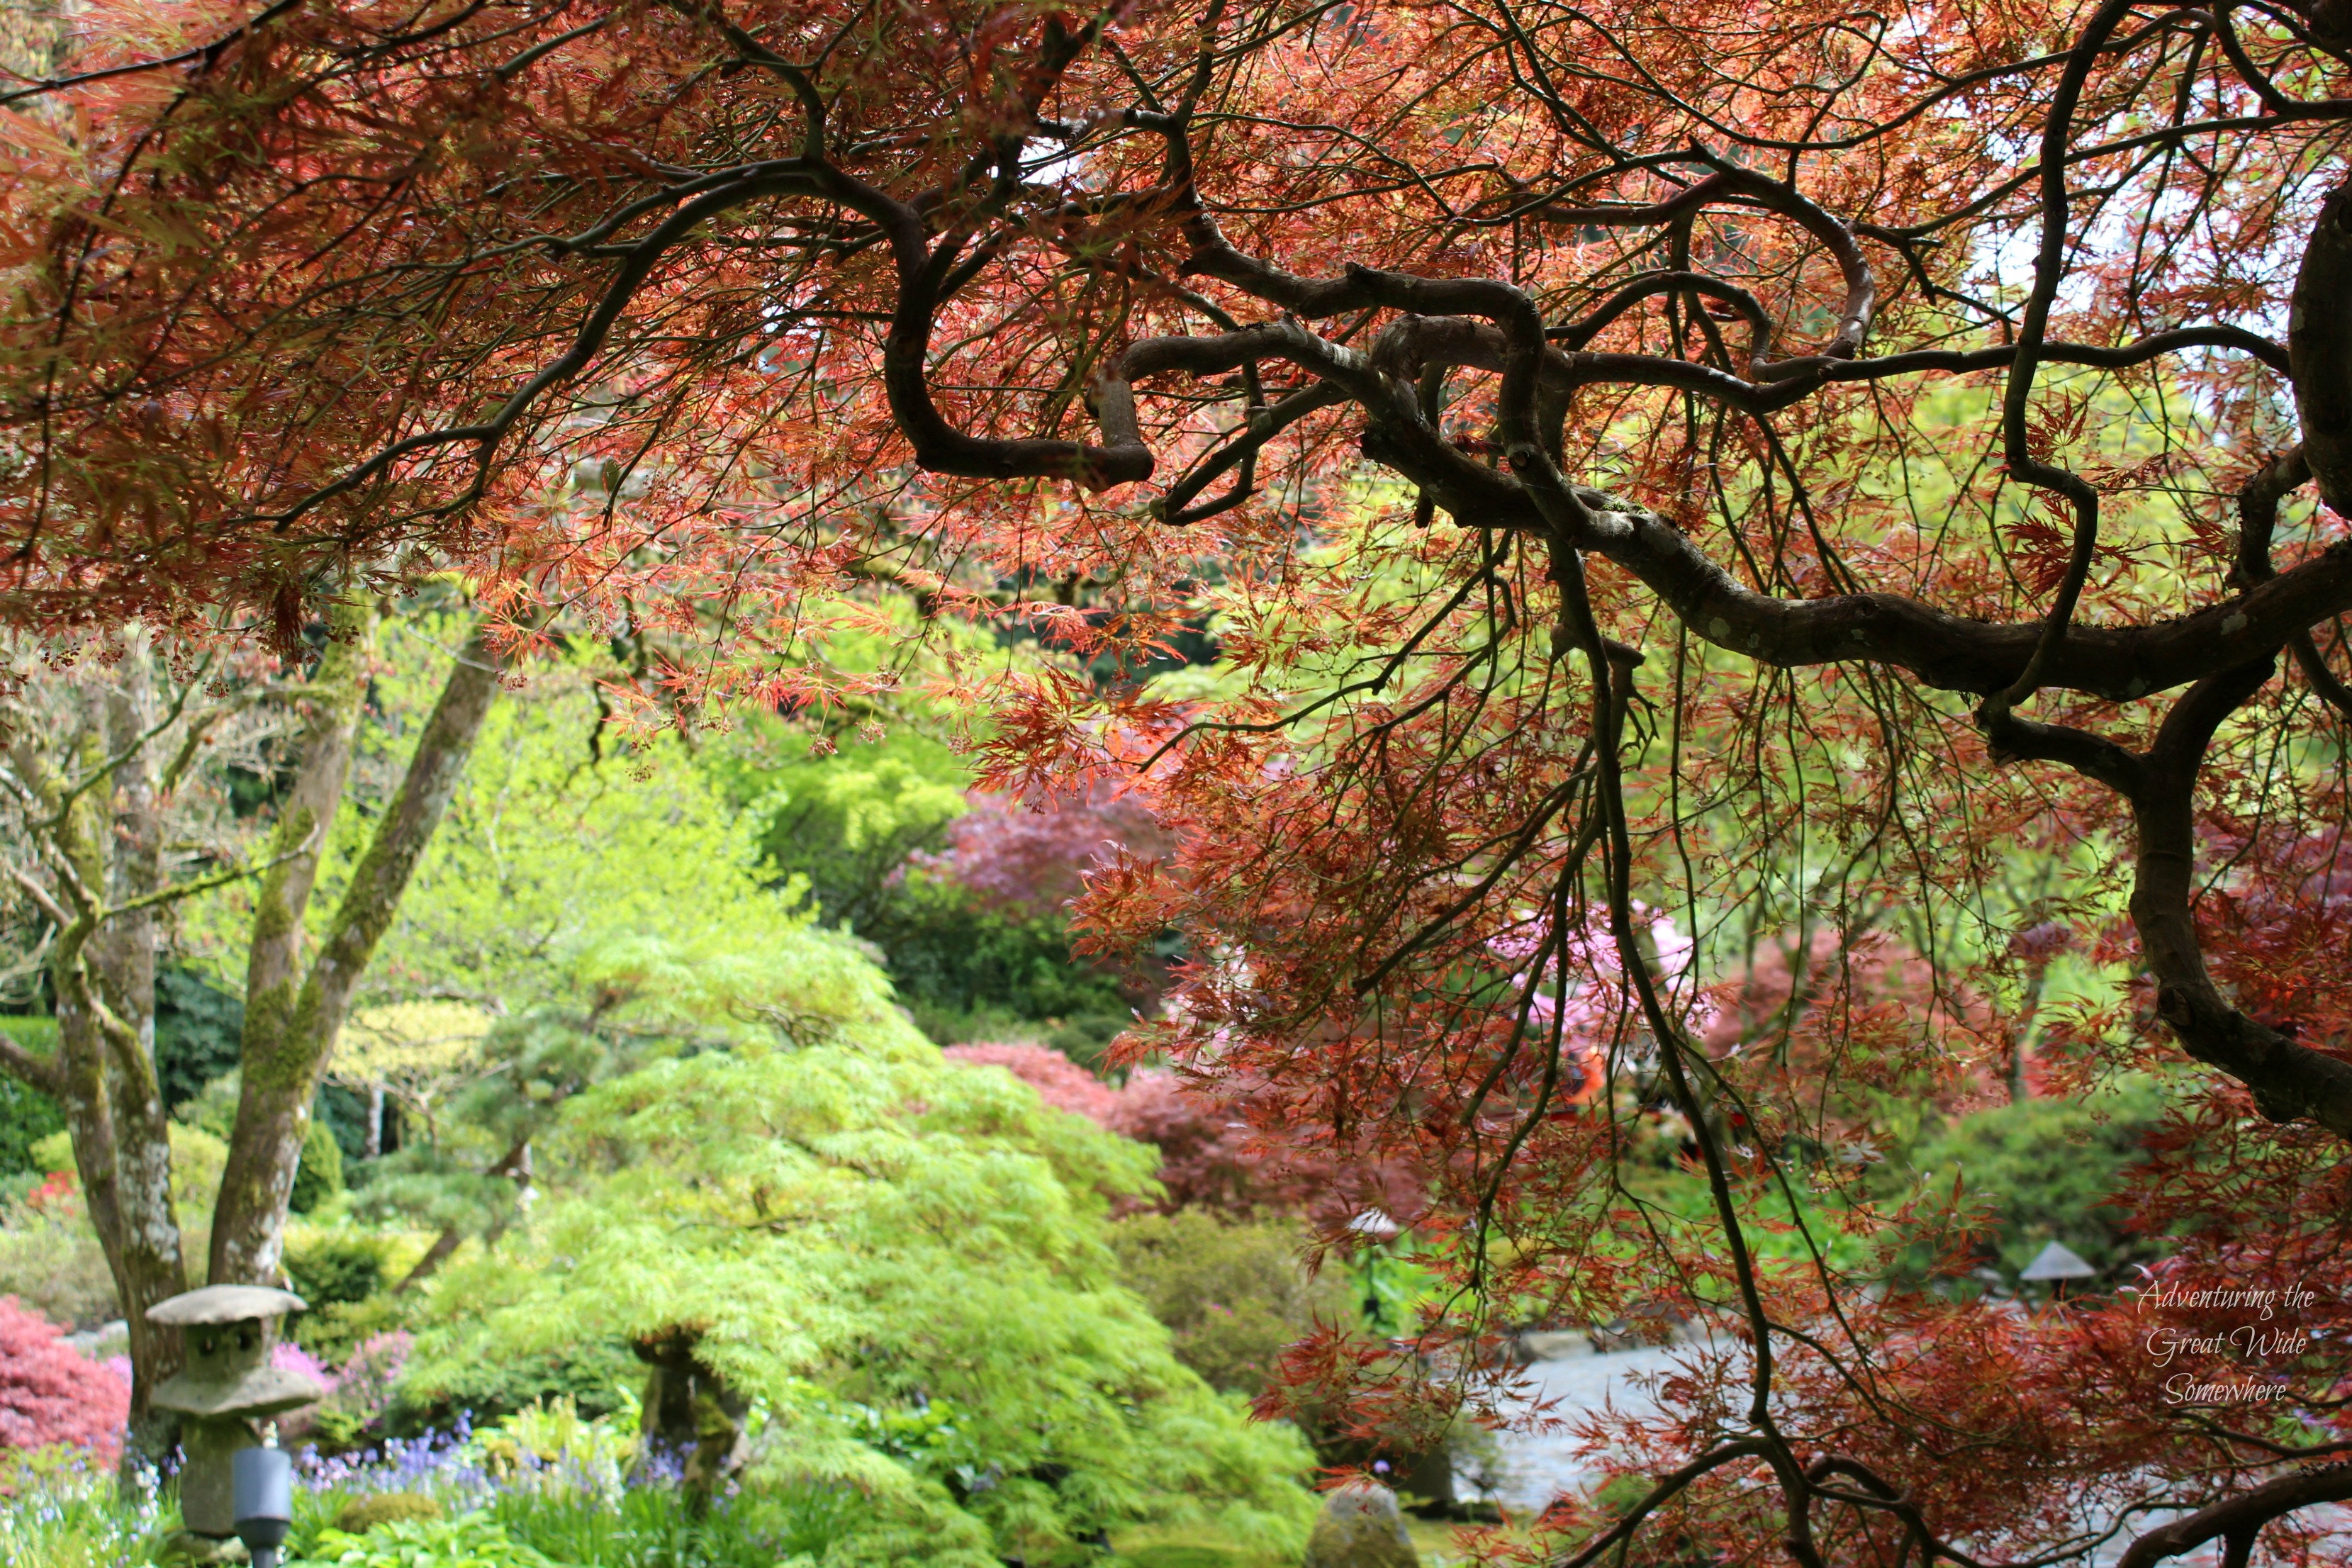 Fall Colors Abound at Butchart Gardens' Japanese Gardens